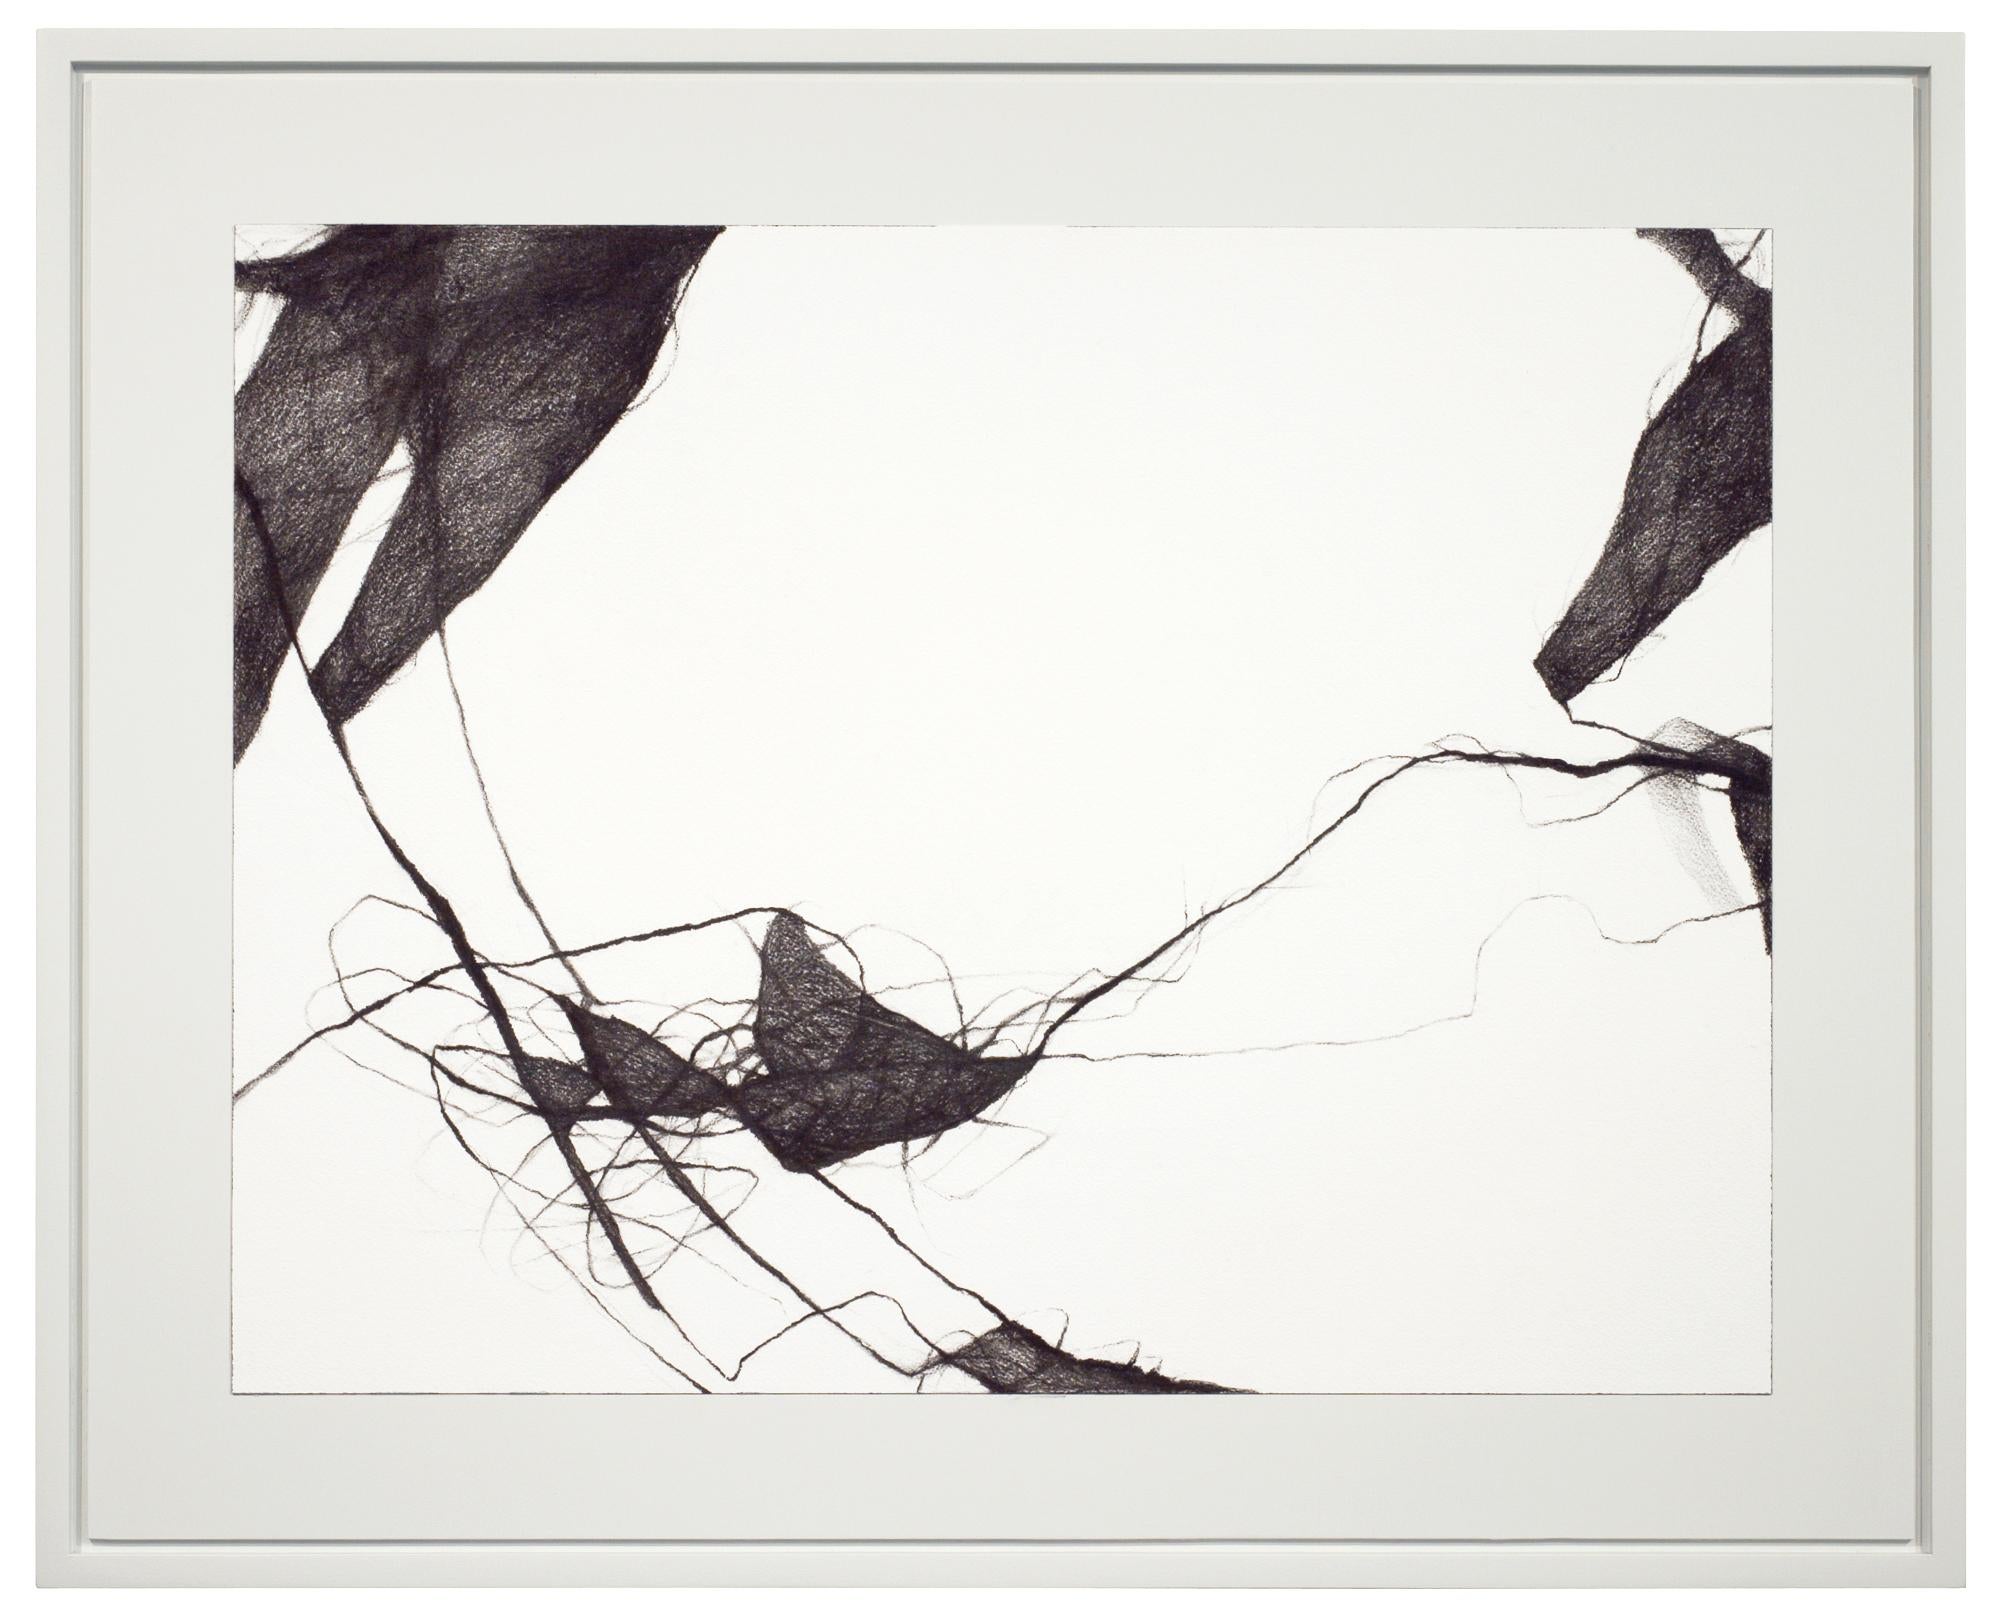 David Mellen Abstract Painting - Charcoal Minimal Abstract Drawing: 'Voices III'